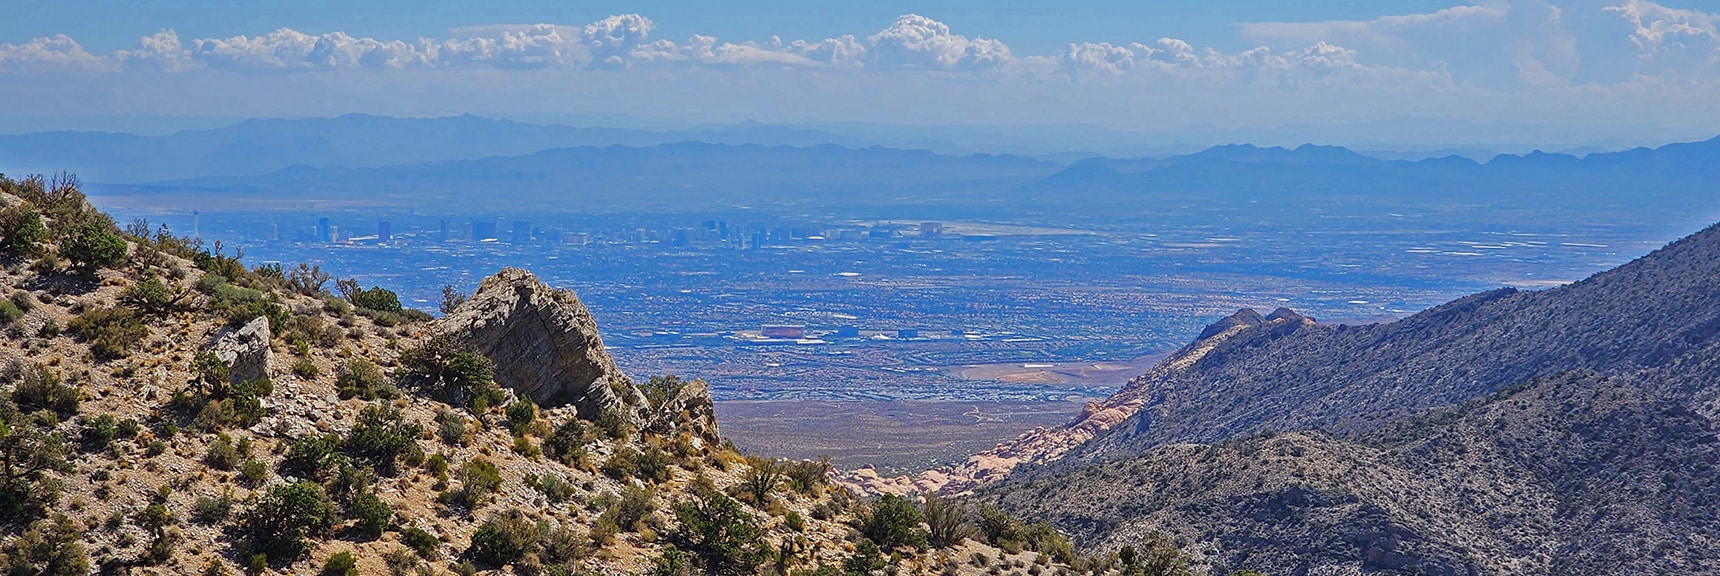 Las Vegas Valley and Strip in Distance | Kyle Canyon Grand Crossing | Southern Half | Red Rock Canyon National Conservation Area, Nevada